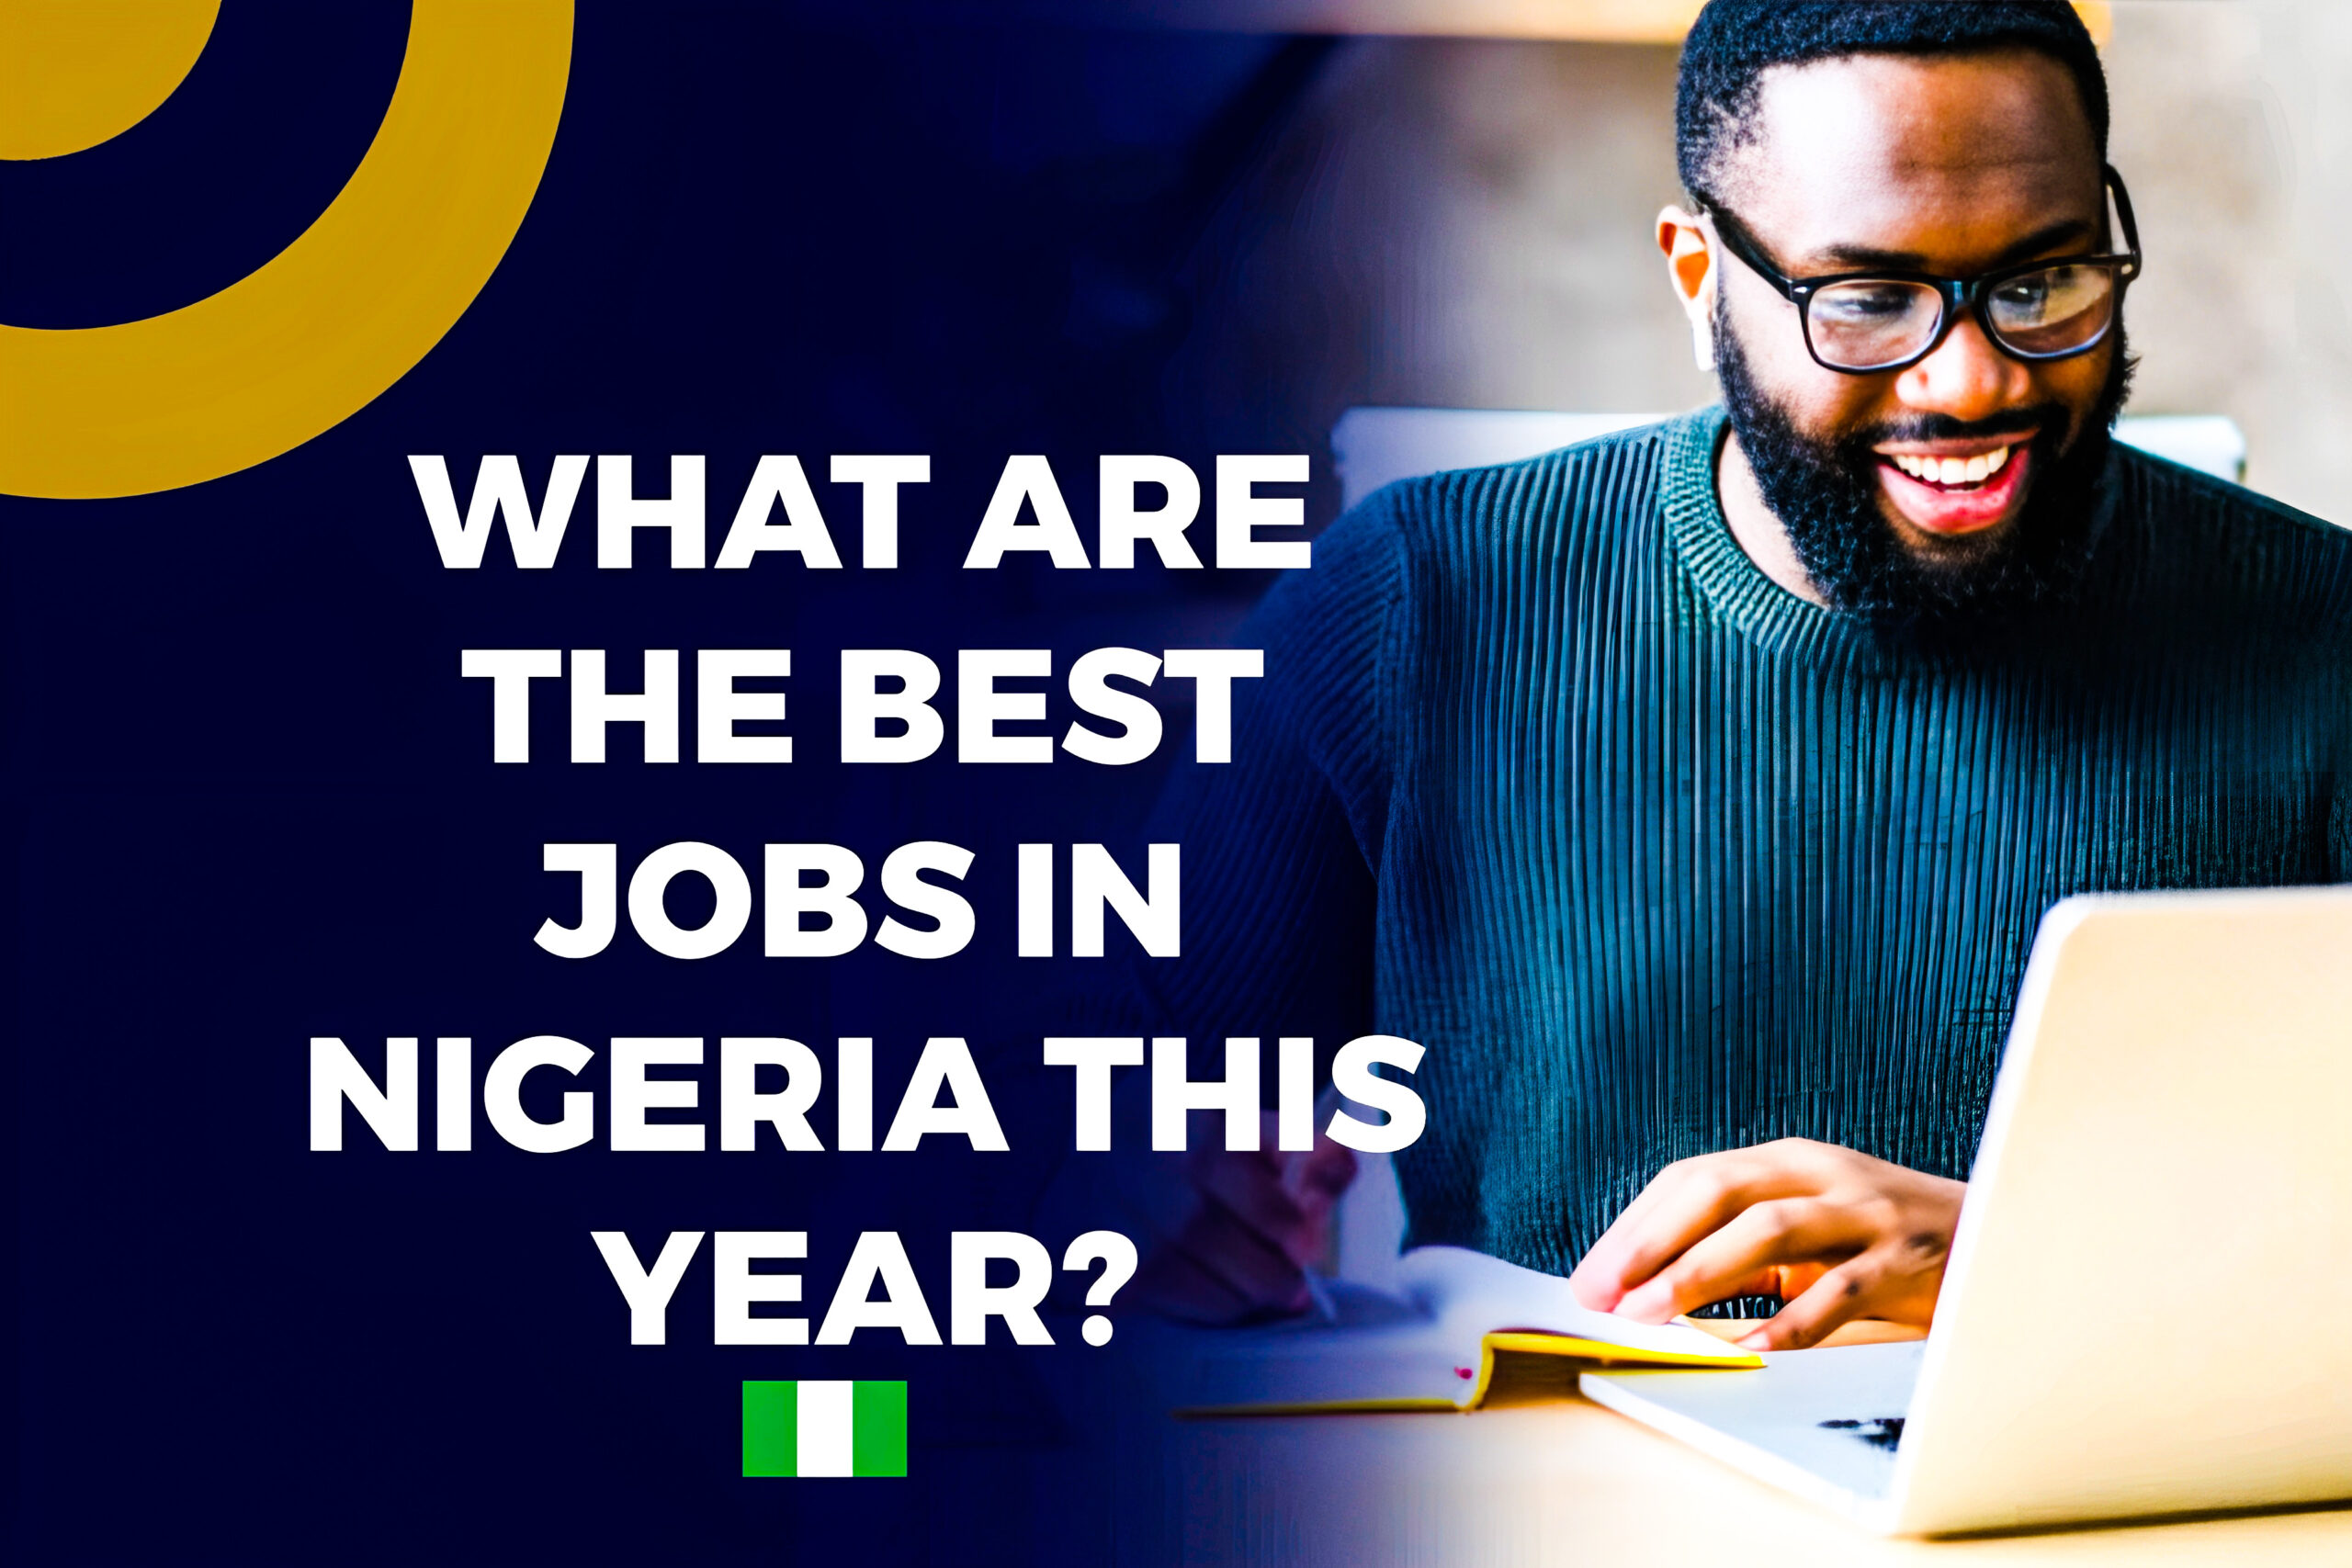 What Are The Best Jobs In Nigeria This Year? 7 Jobs That Are High In Demand In Nigeria